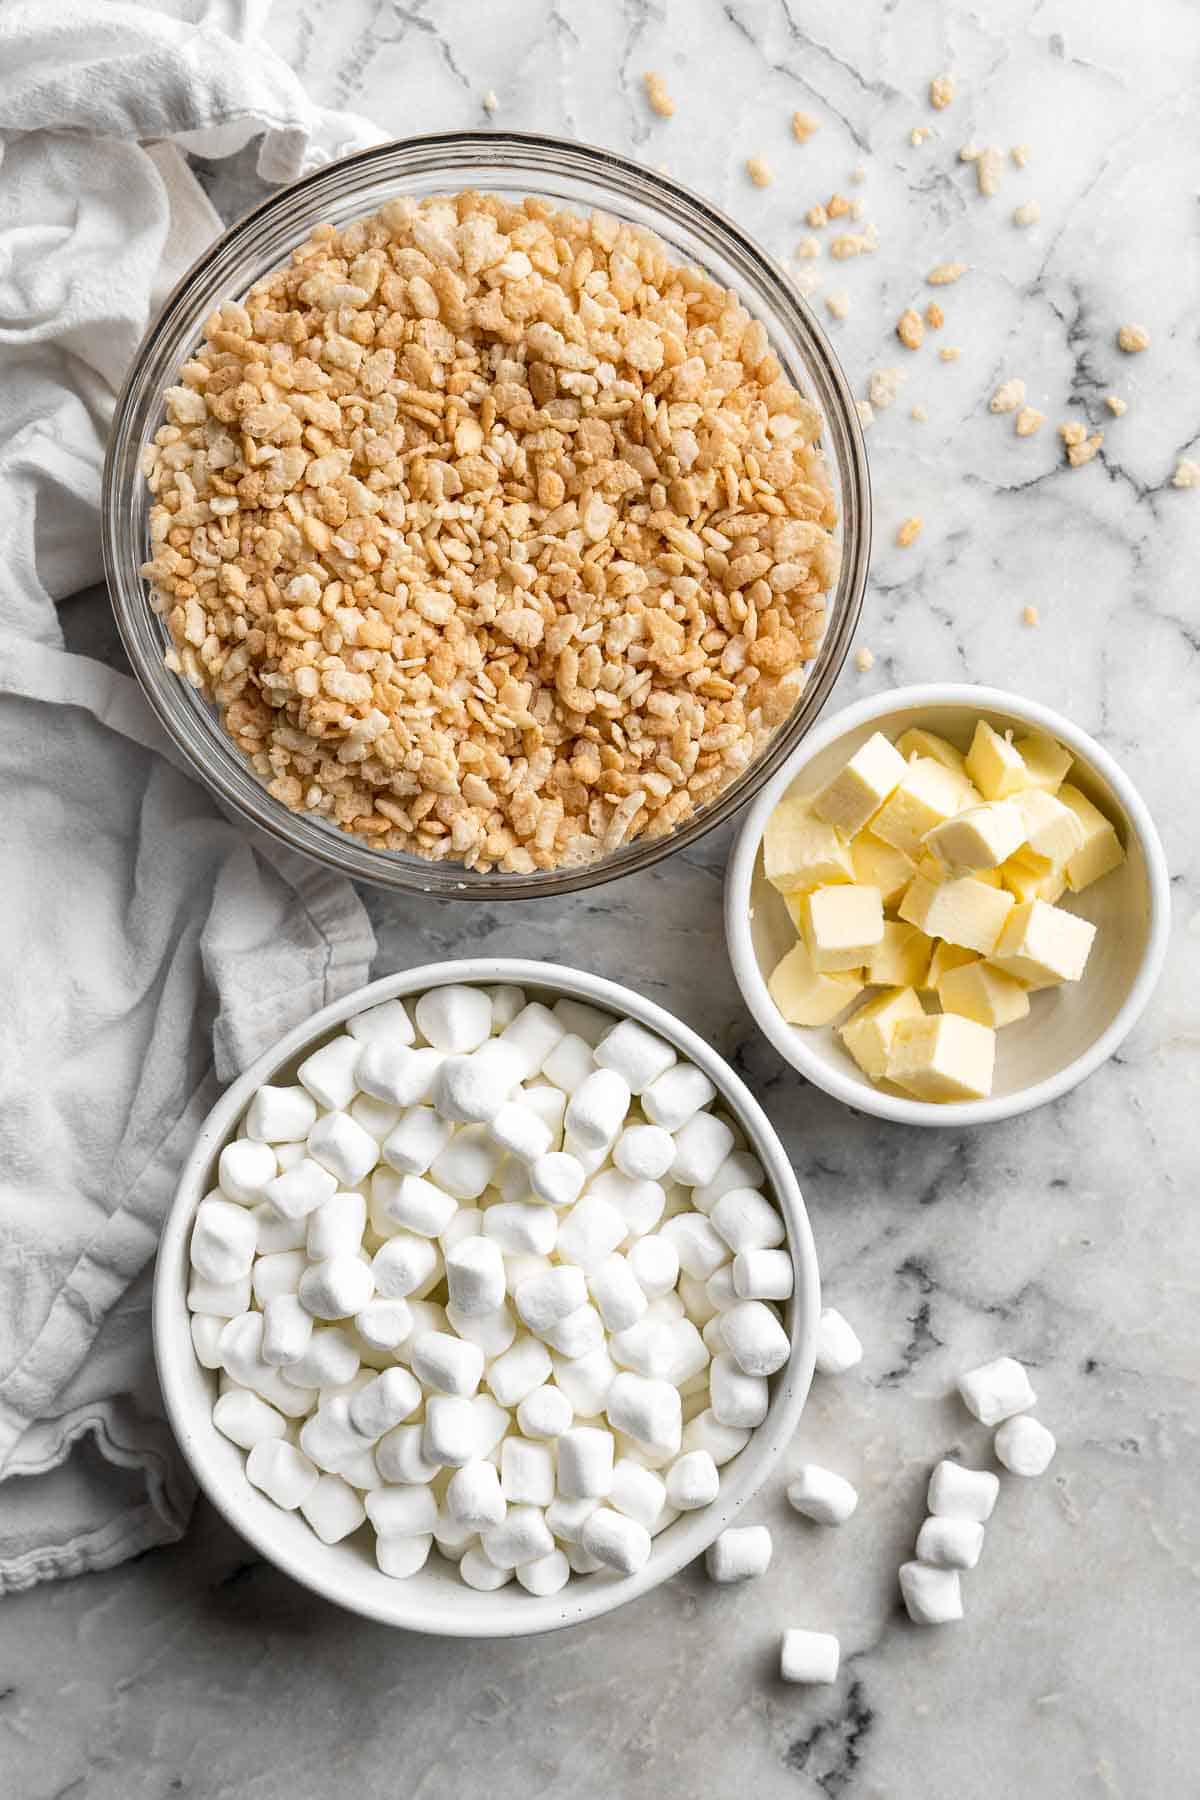 Rice Krispies Treats are a classic dessert loved by all. These chewy, crunchy, sticky-sweet treats are easy to make from scratch using just 3 ingredients! | aheadofthyme.com